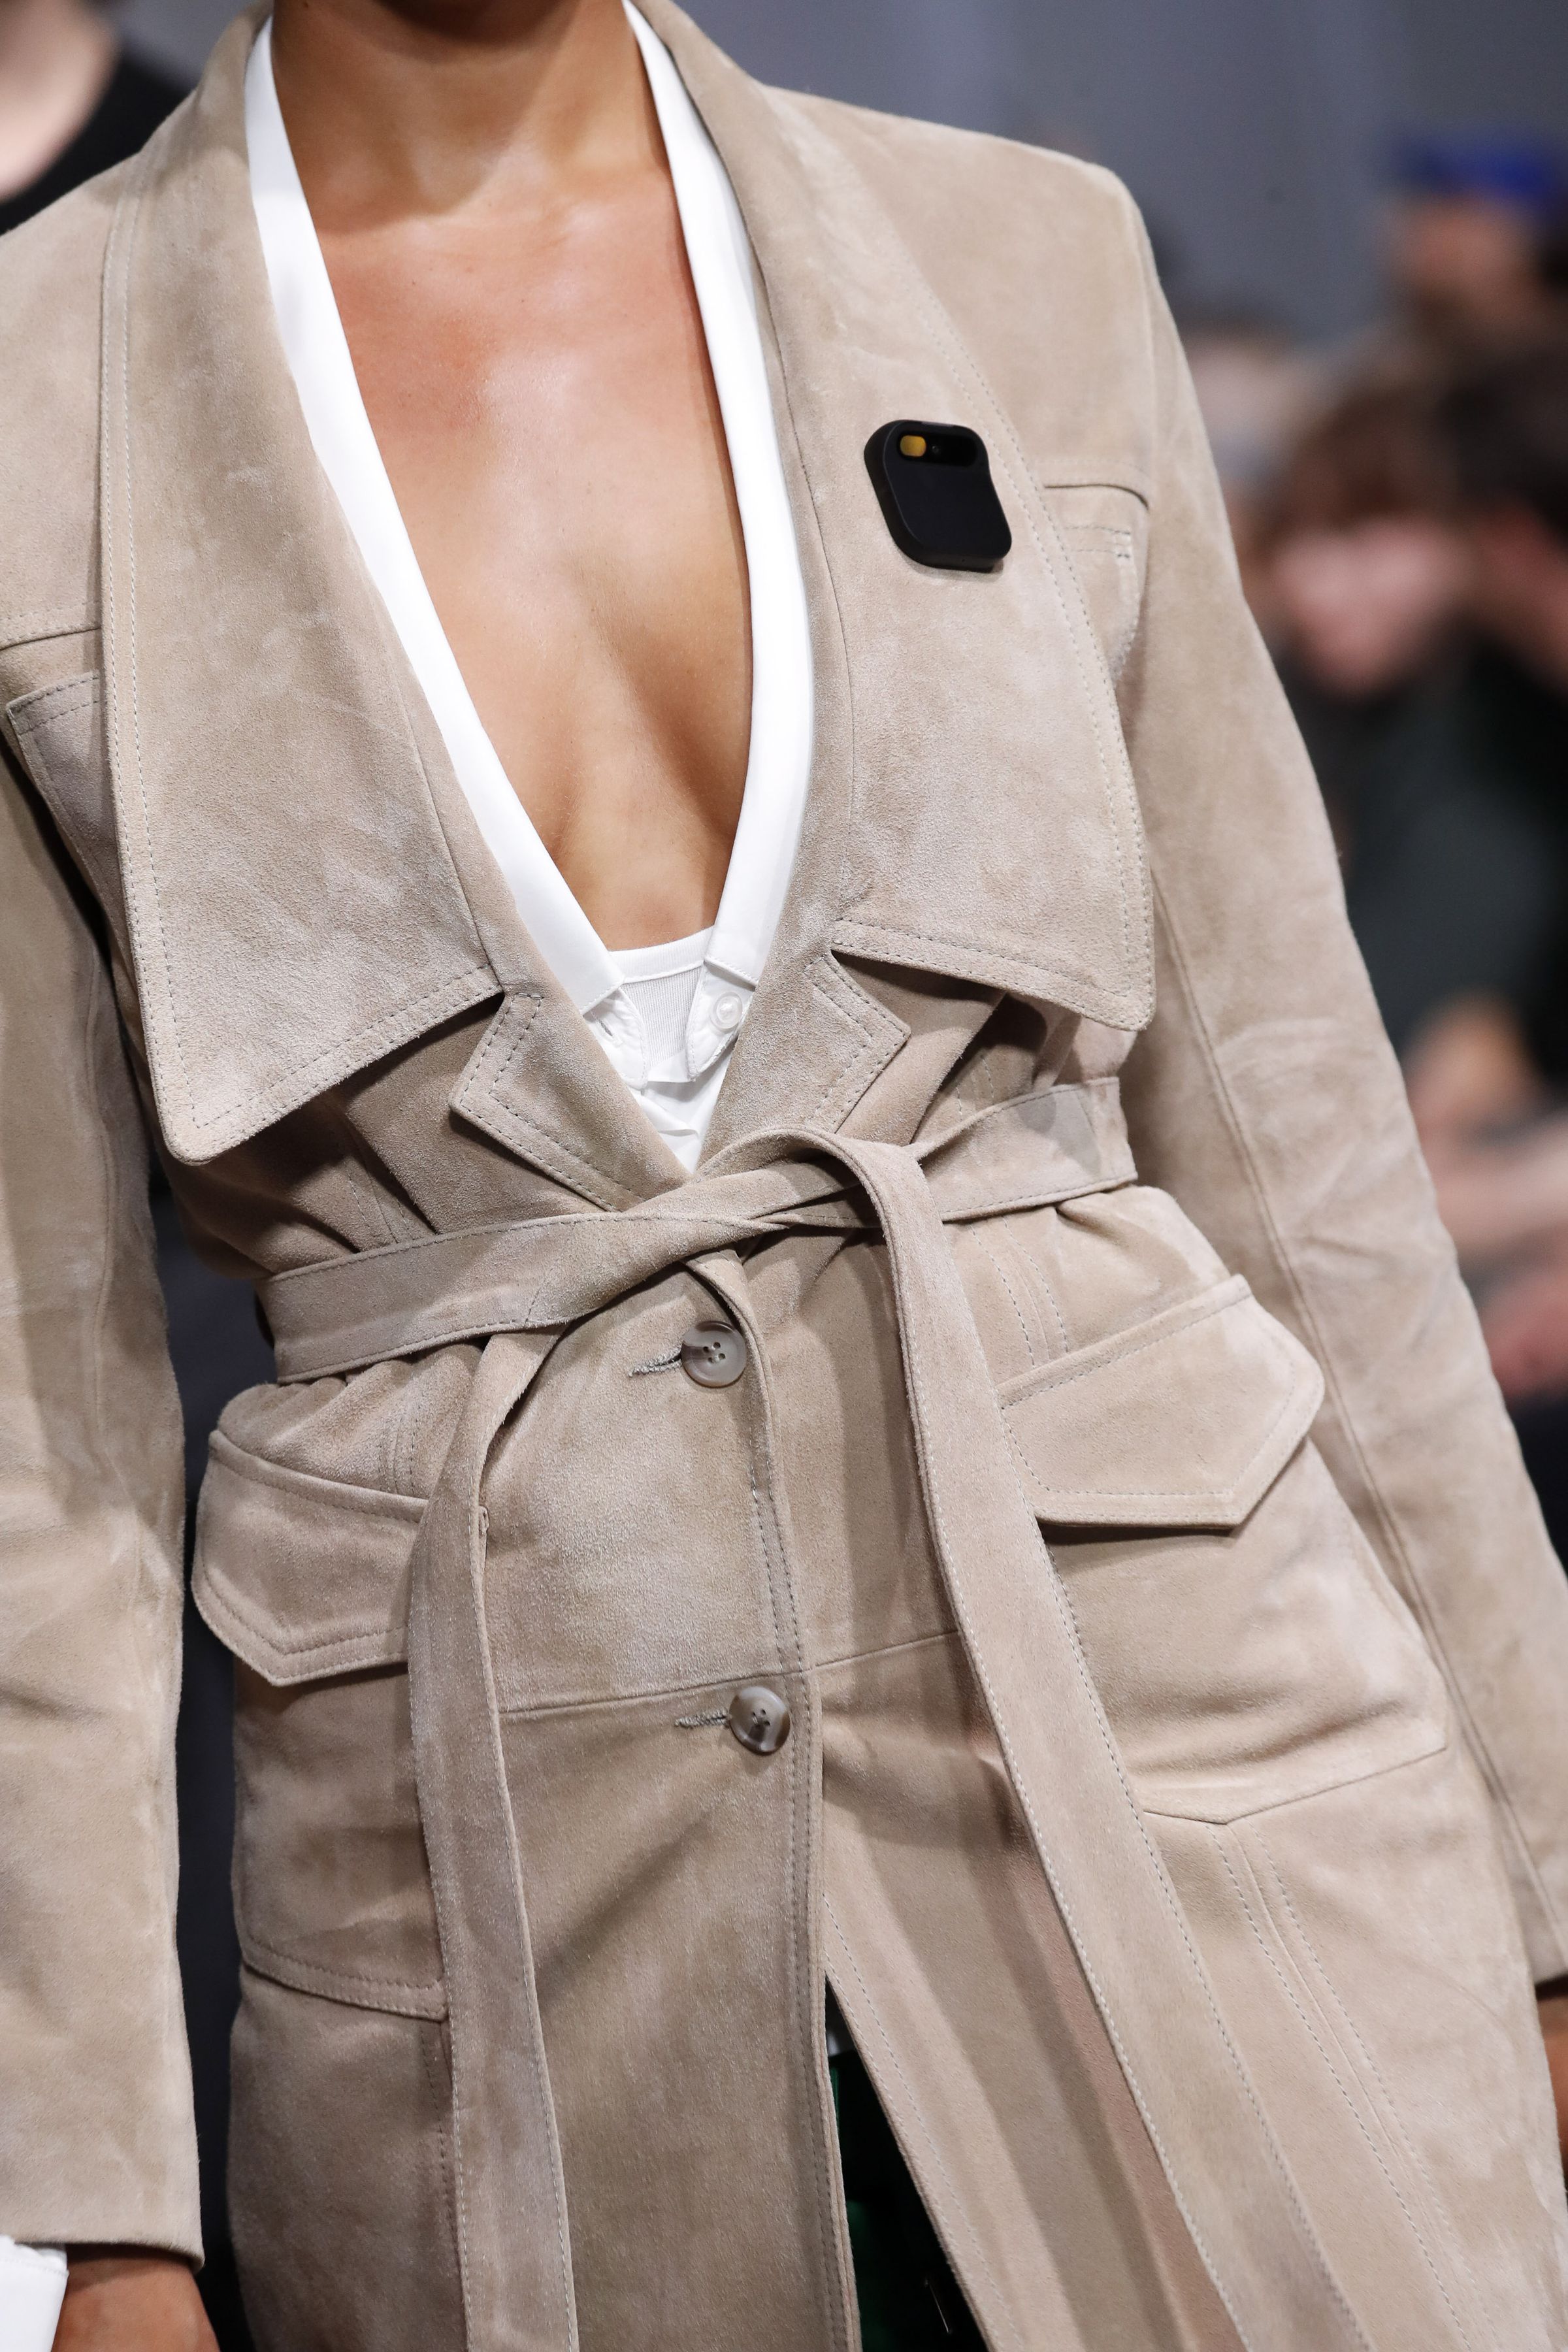 A close-up of a model, from the neck down, showing the Humane AI pin on their tan jacket’s broad lapel.